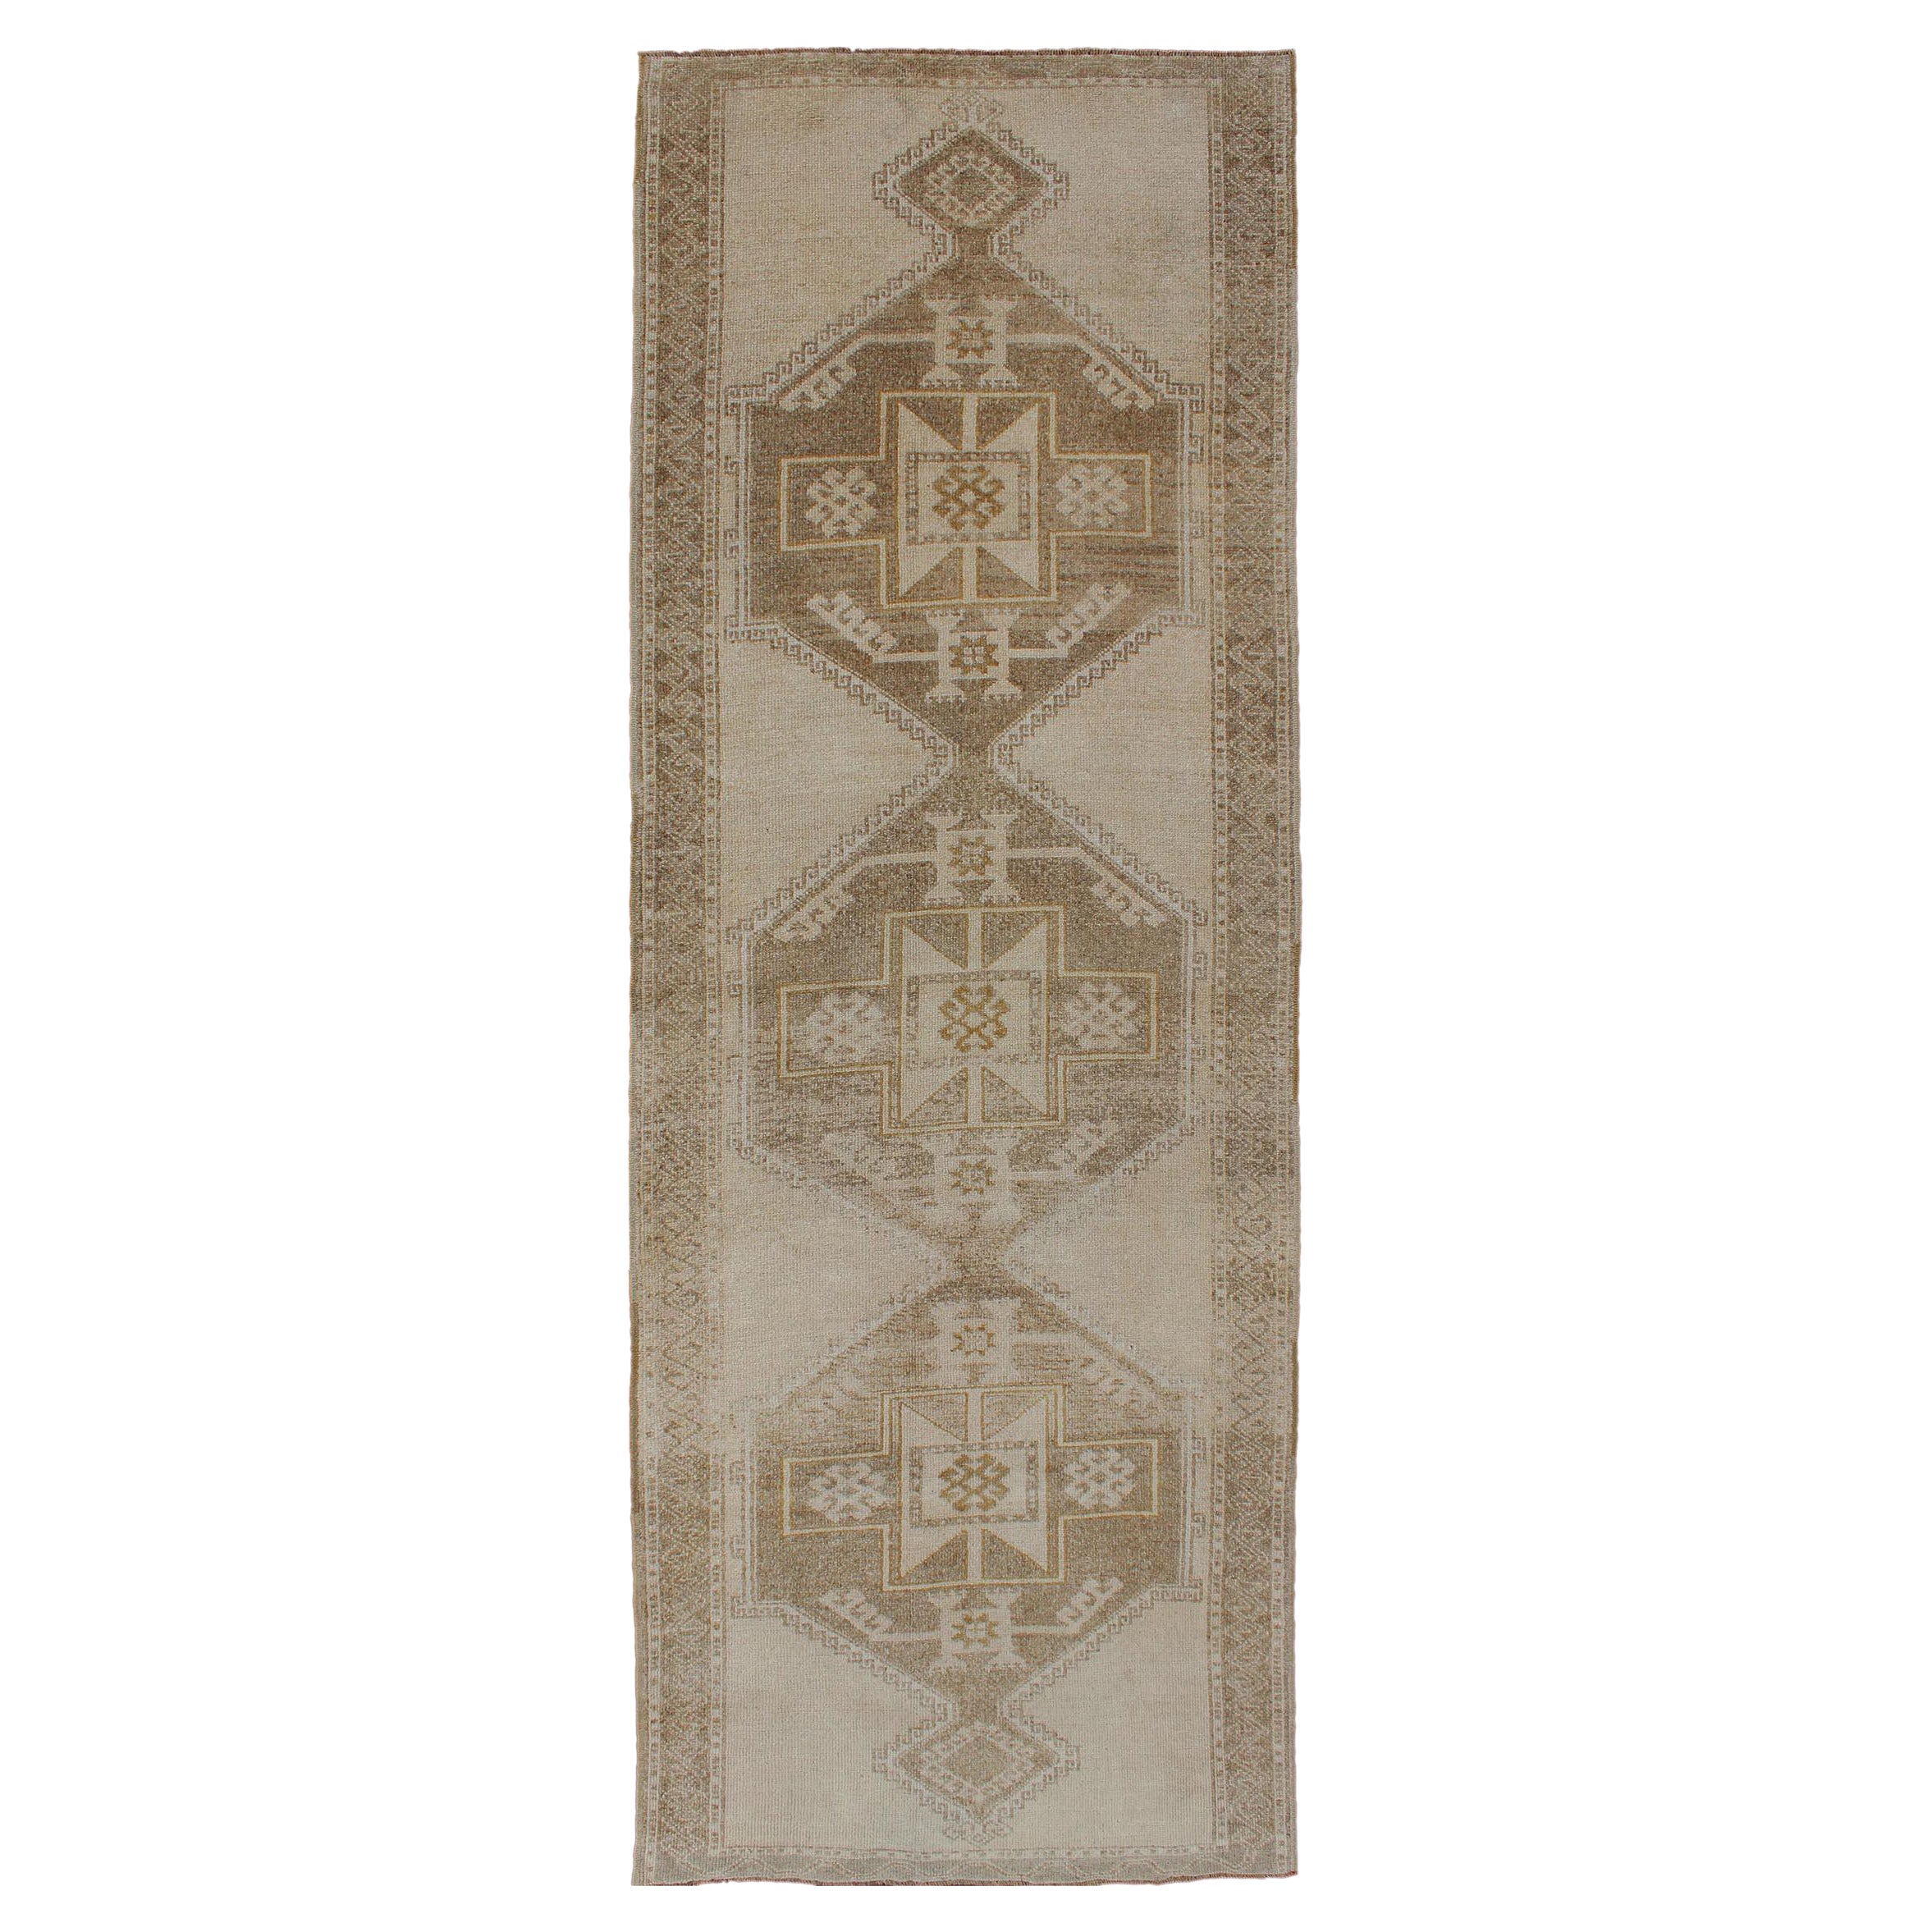 Vintage Oushak Gallery Runner with Three Medallion Design in Taupe, Light Brown